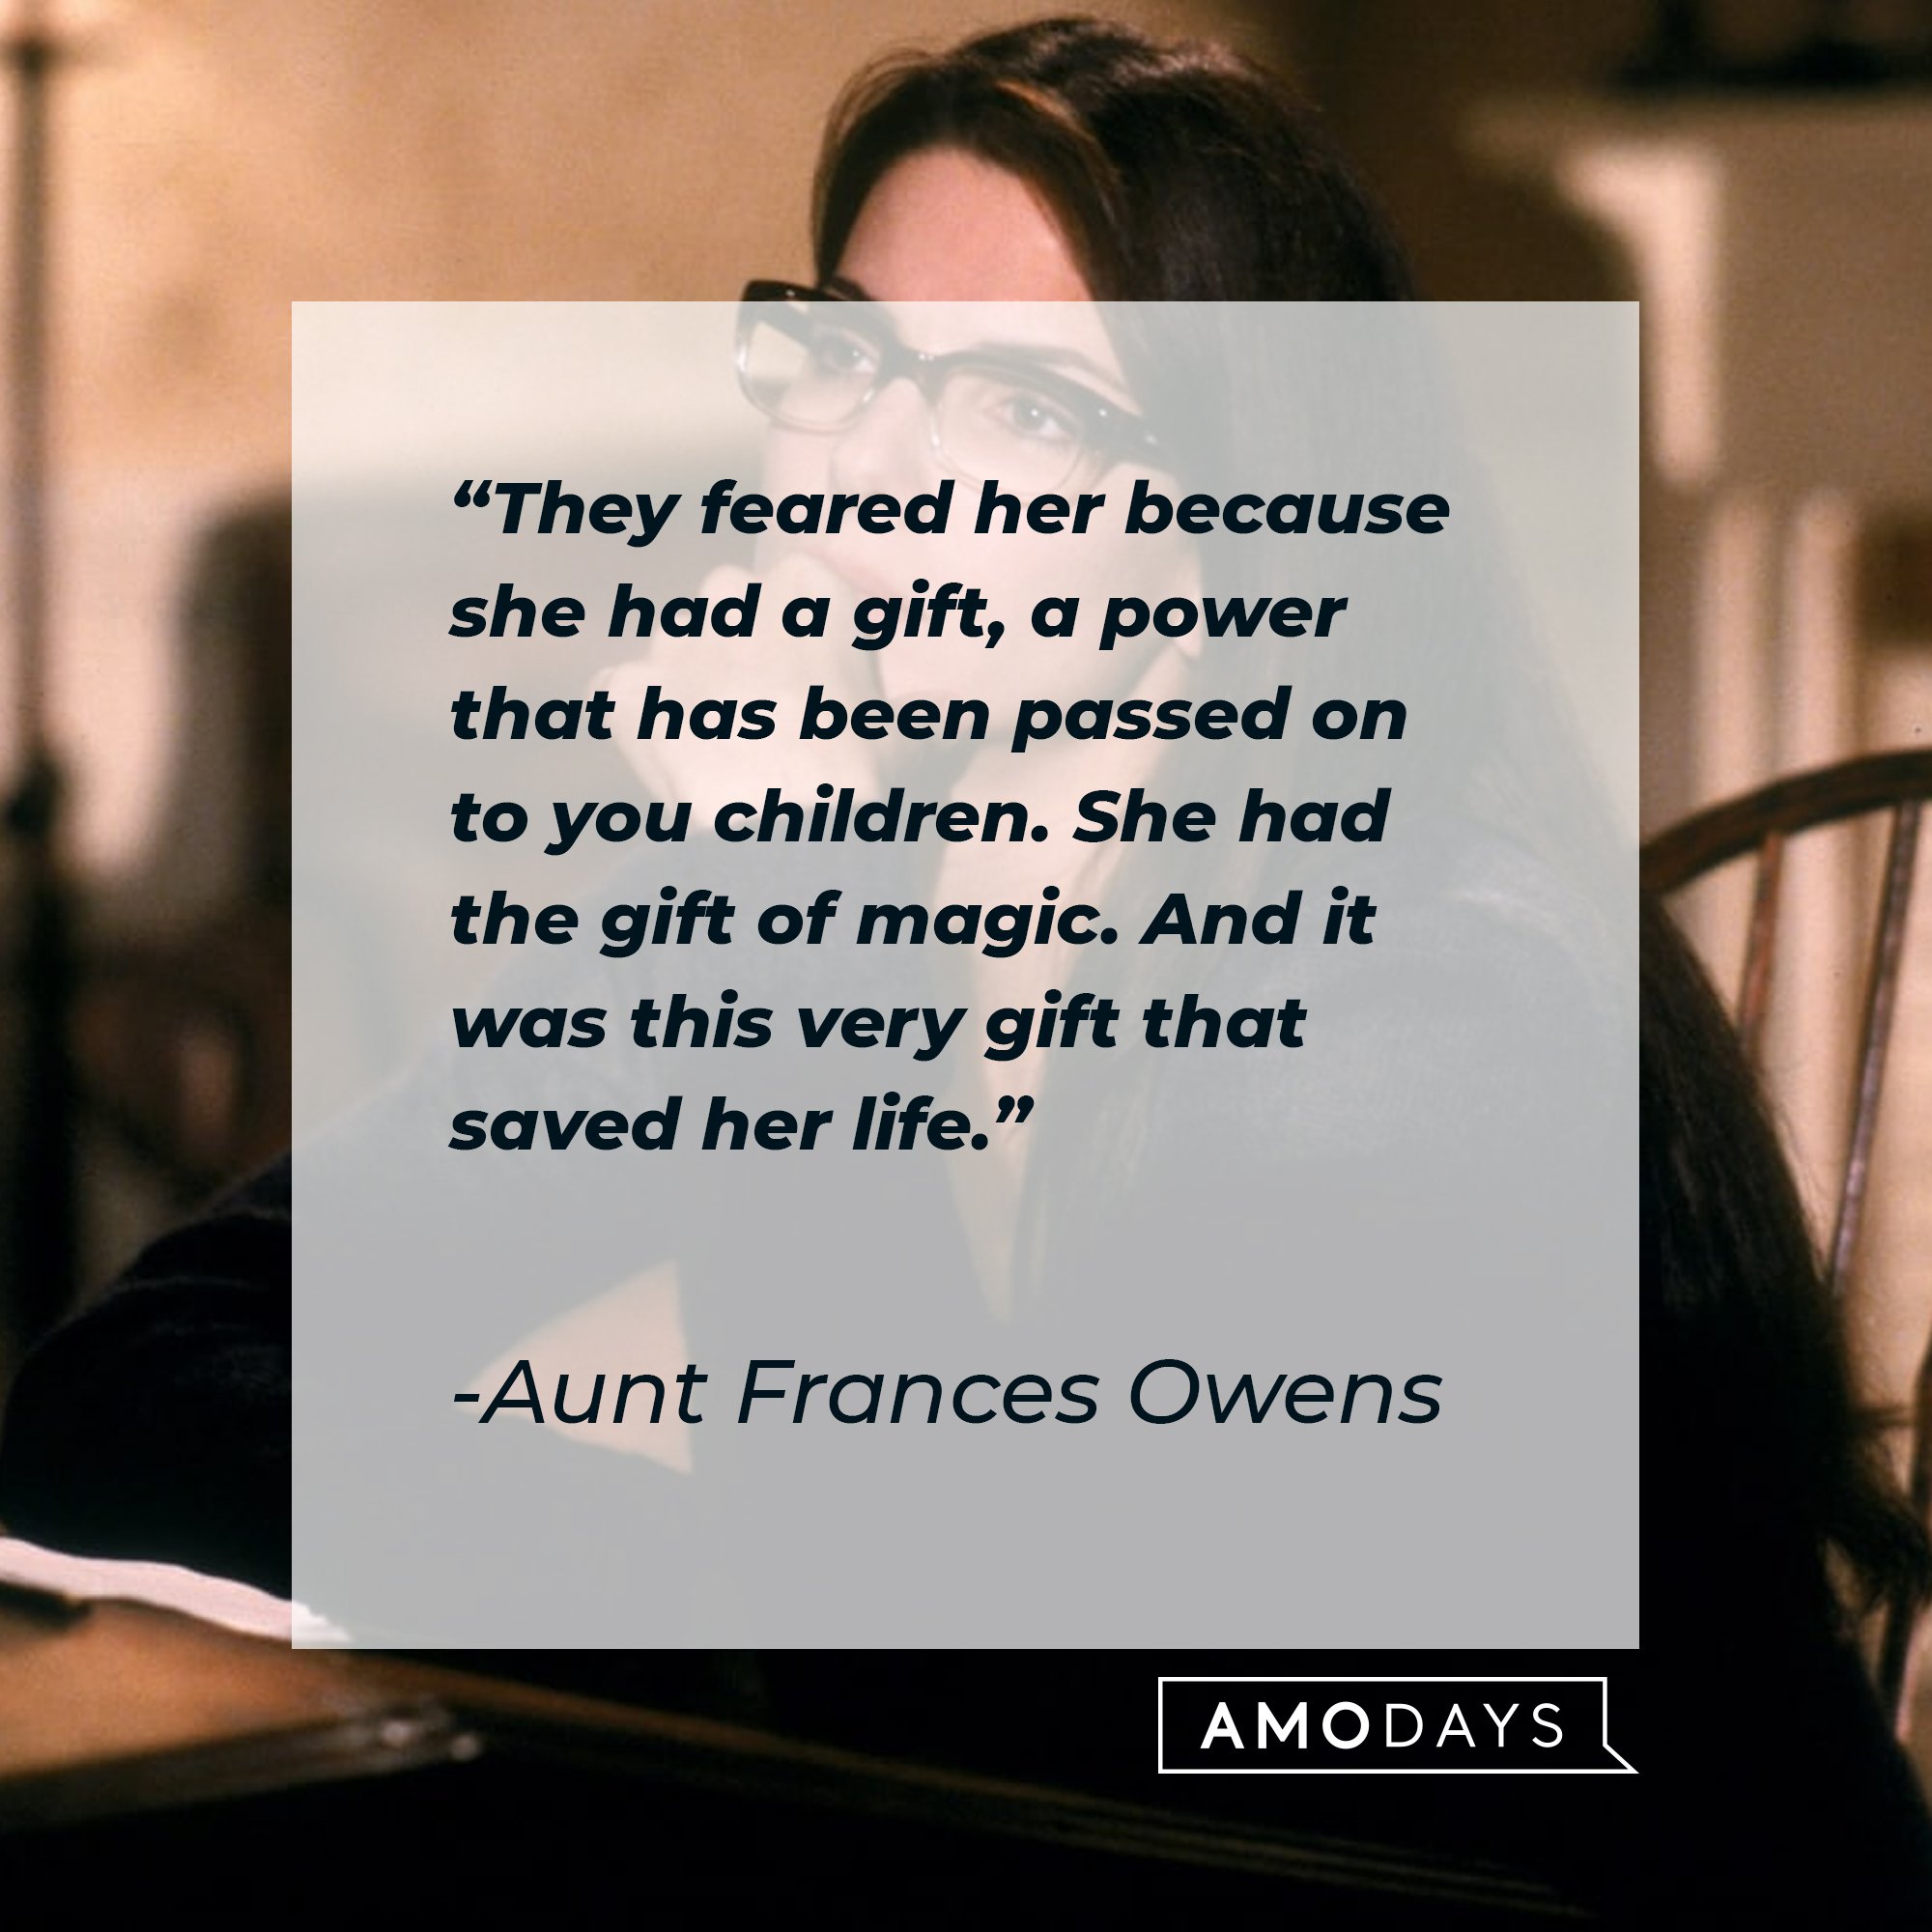   Aunt Frances Owens’ quote: "They feared her because she had a gift, a power that has been passed on to you children. She had the gift of magic. And it was this very gift that saved her life." | Image: AmoDays